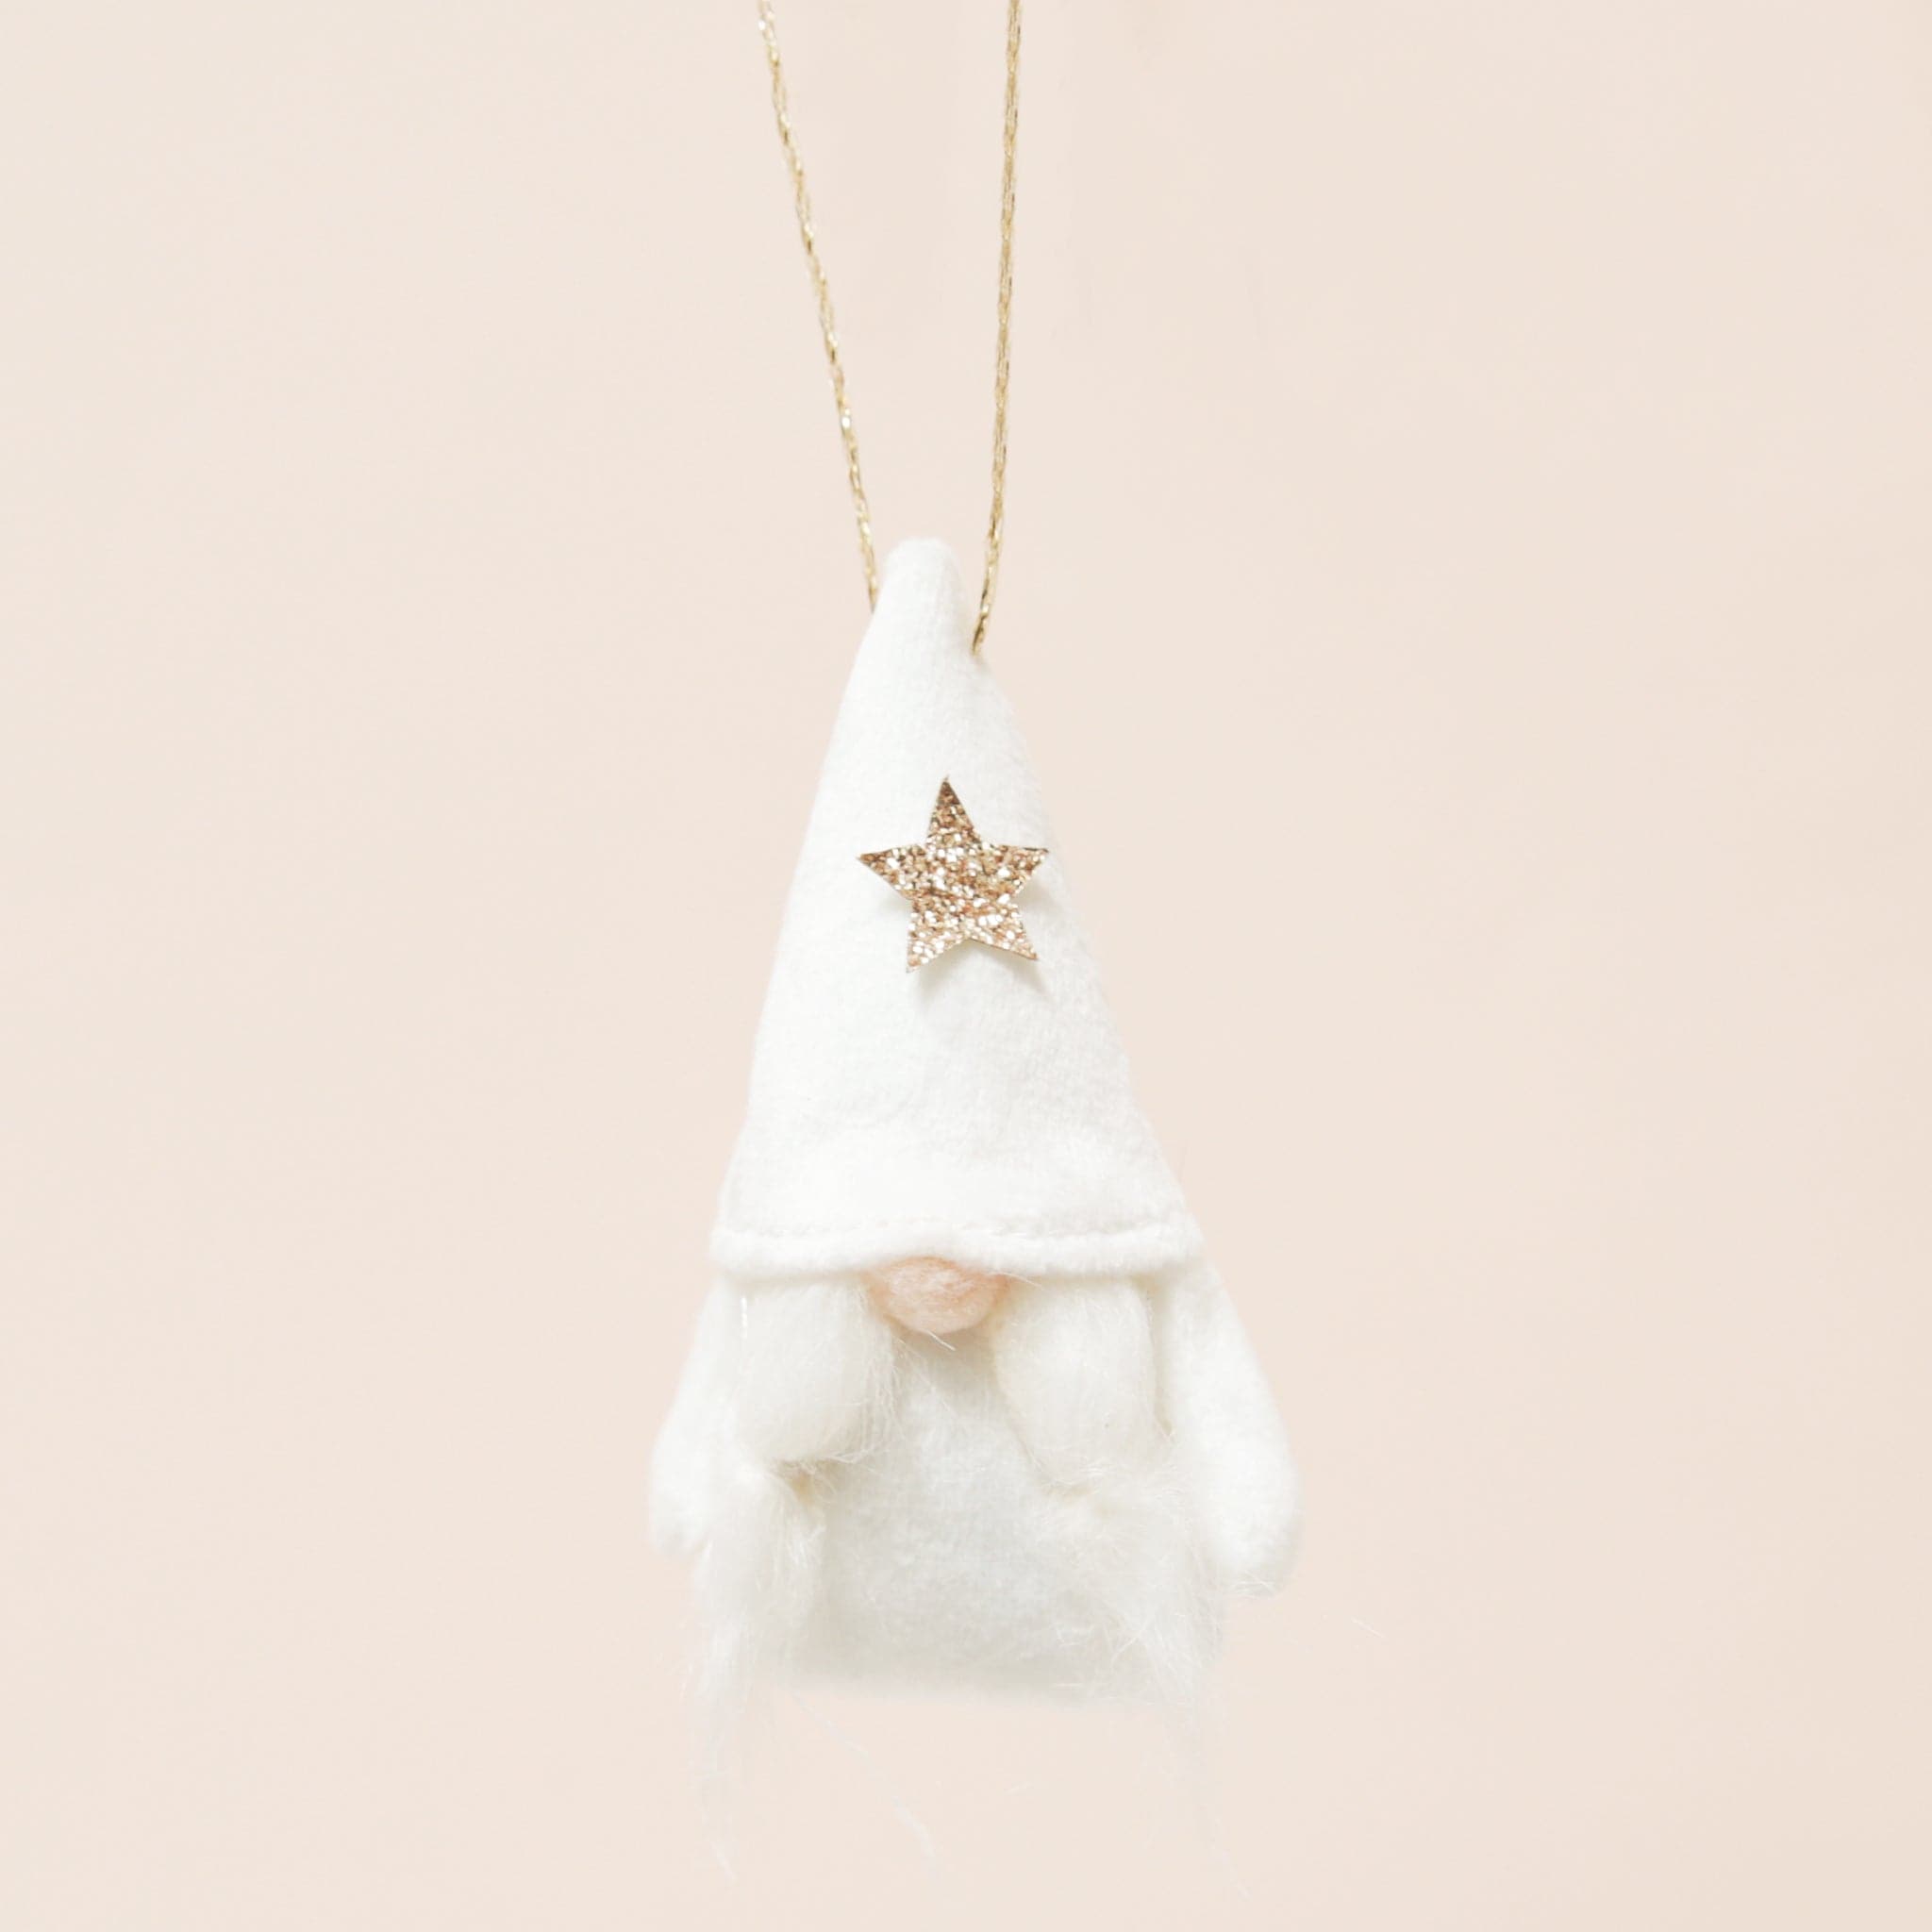 A plush white gnome ornament with a gold star and pigtail beard on a neutral ground.